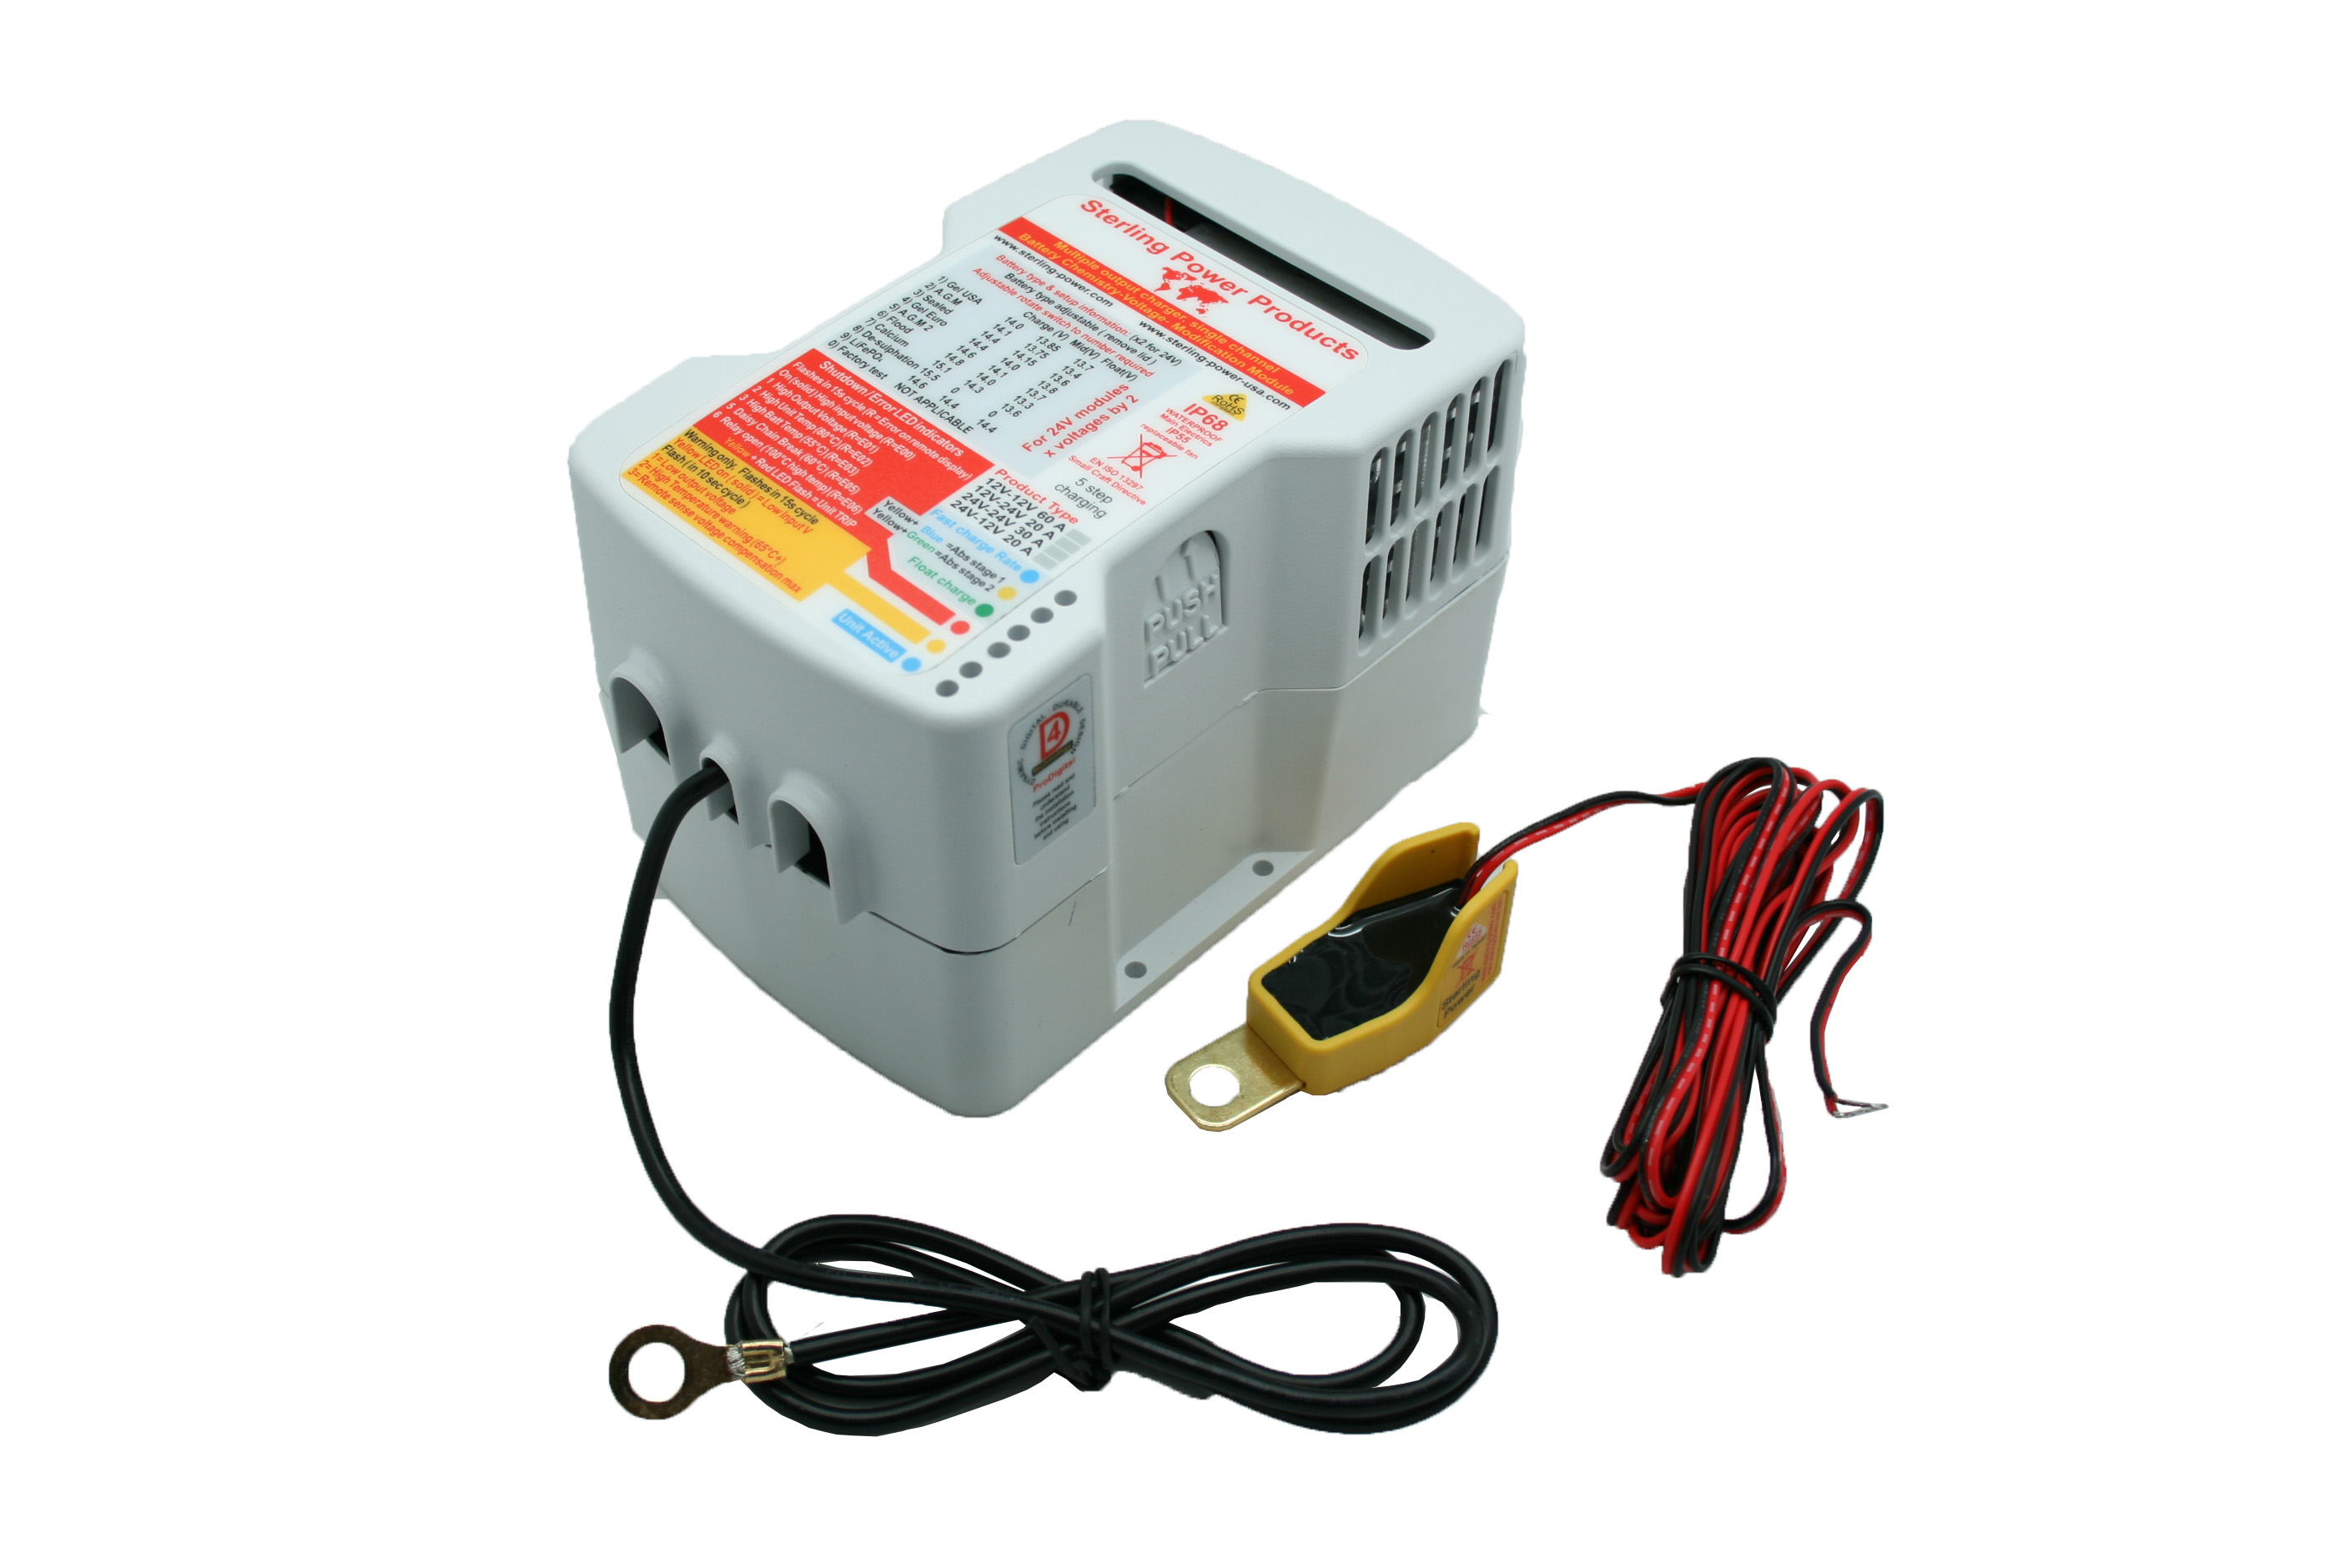 Batterie Ladeadapter Eingang 24V max 30A / 24V